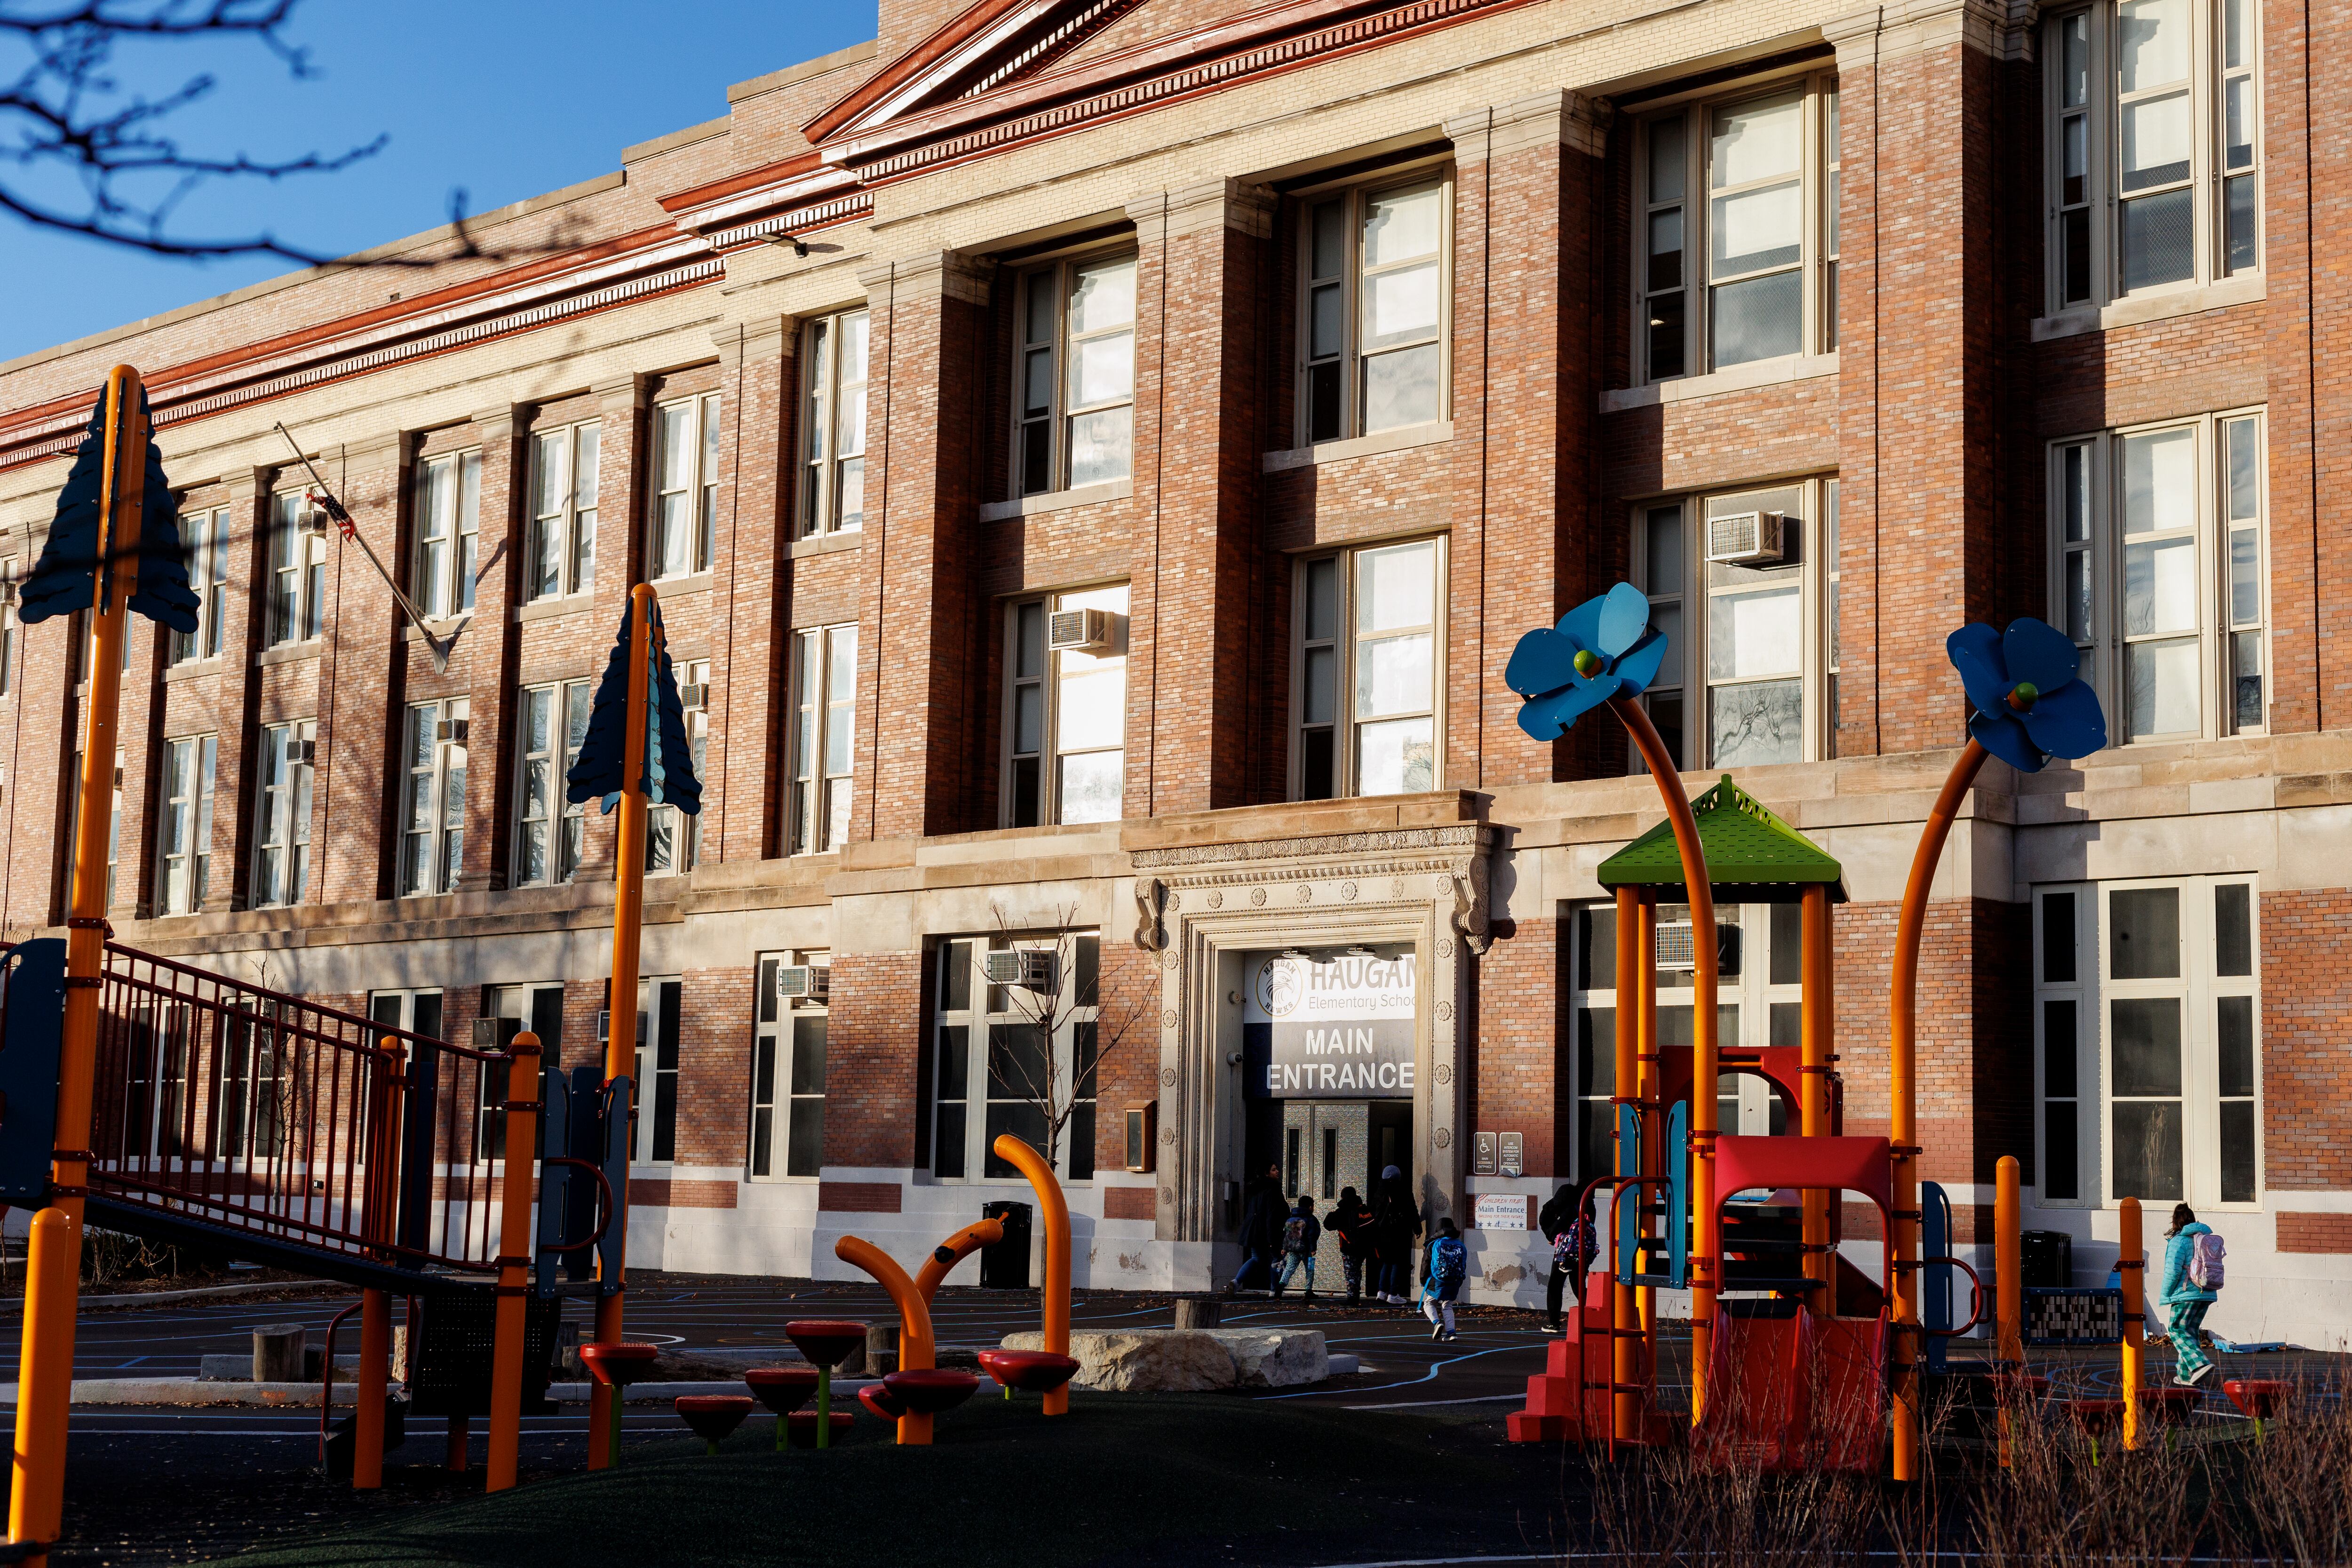 The front entrance of a large school building with students walking toward the door. There is a playground in the foreground.